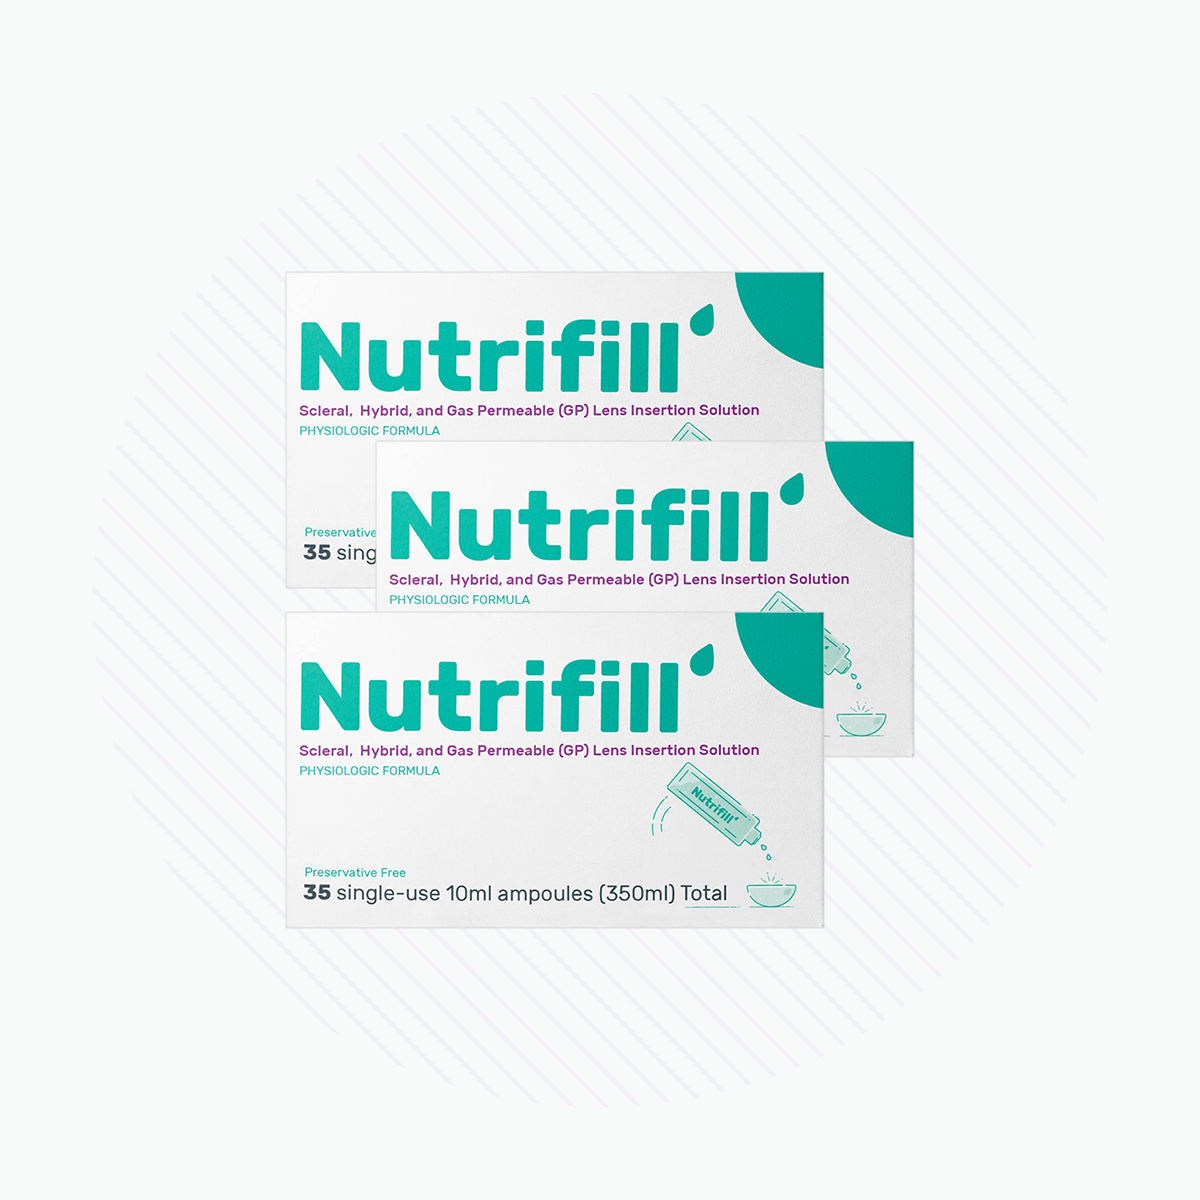 Nutrifill Preservative Free Scleral, Hybrid, and Gas Permeable (GP) Lens Insertion Solution (3-Pack of 35 Vials) - Dryeye Rescue